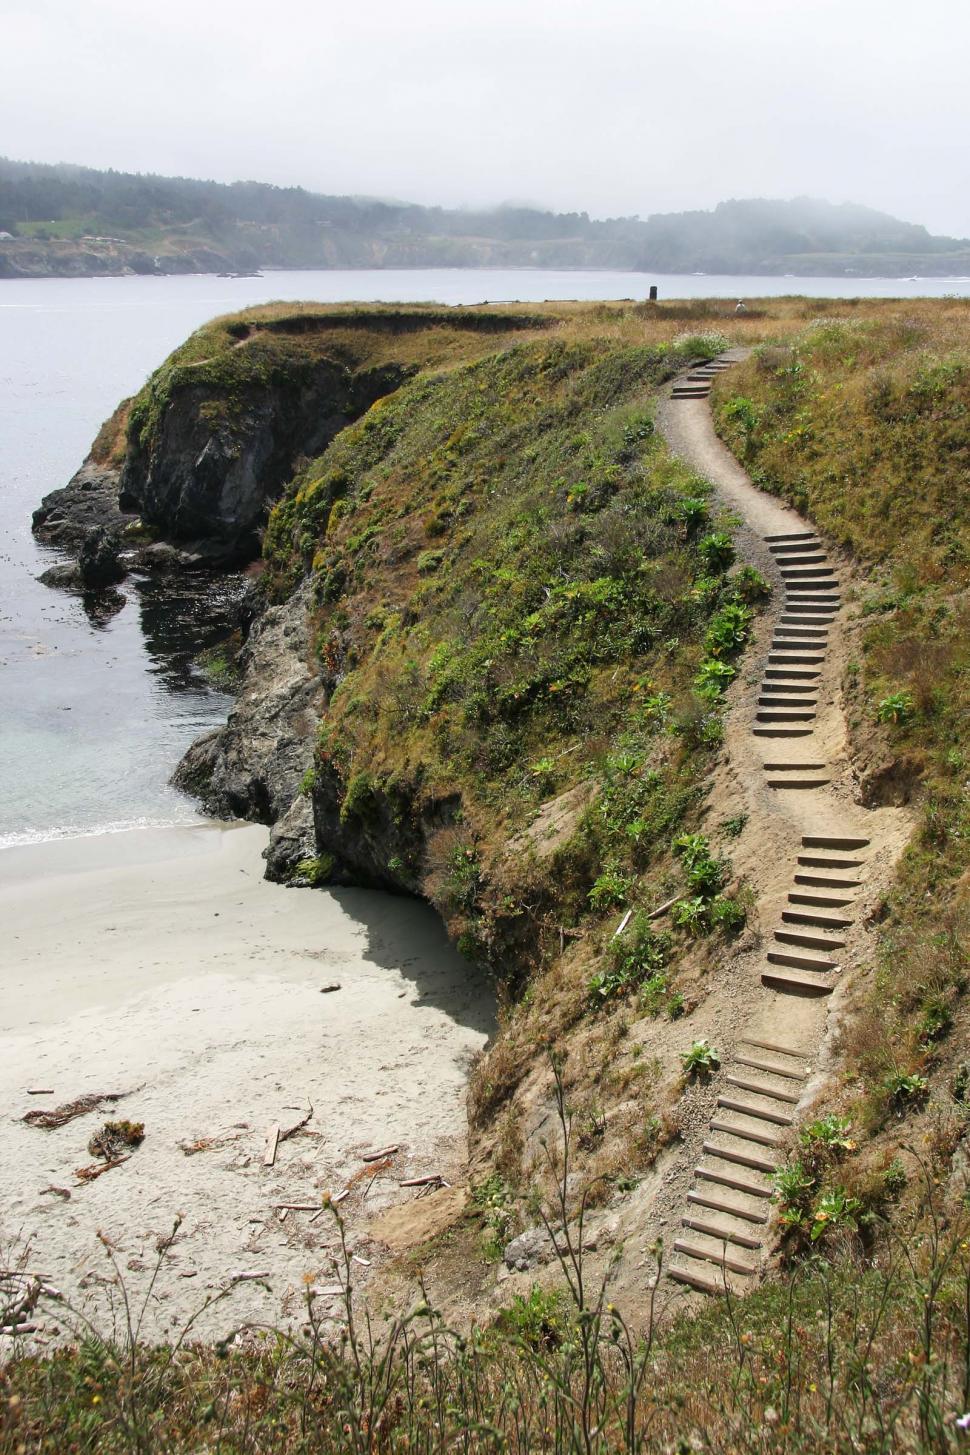 Free Image of beach mendocino california fog cliff cliffs rocky shore ocean sand wave grass steps stairs rocks 